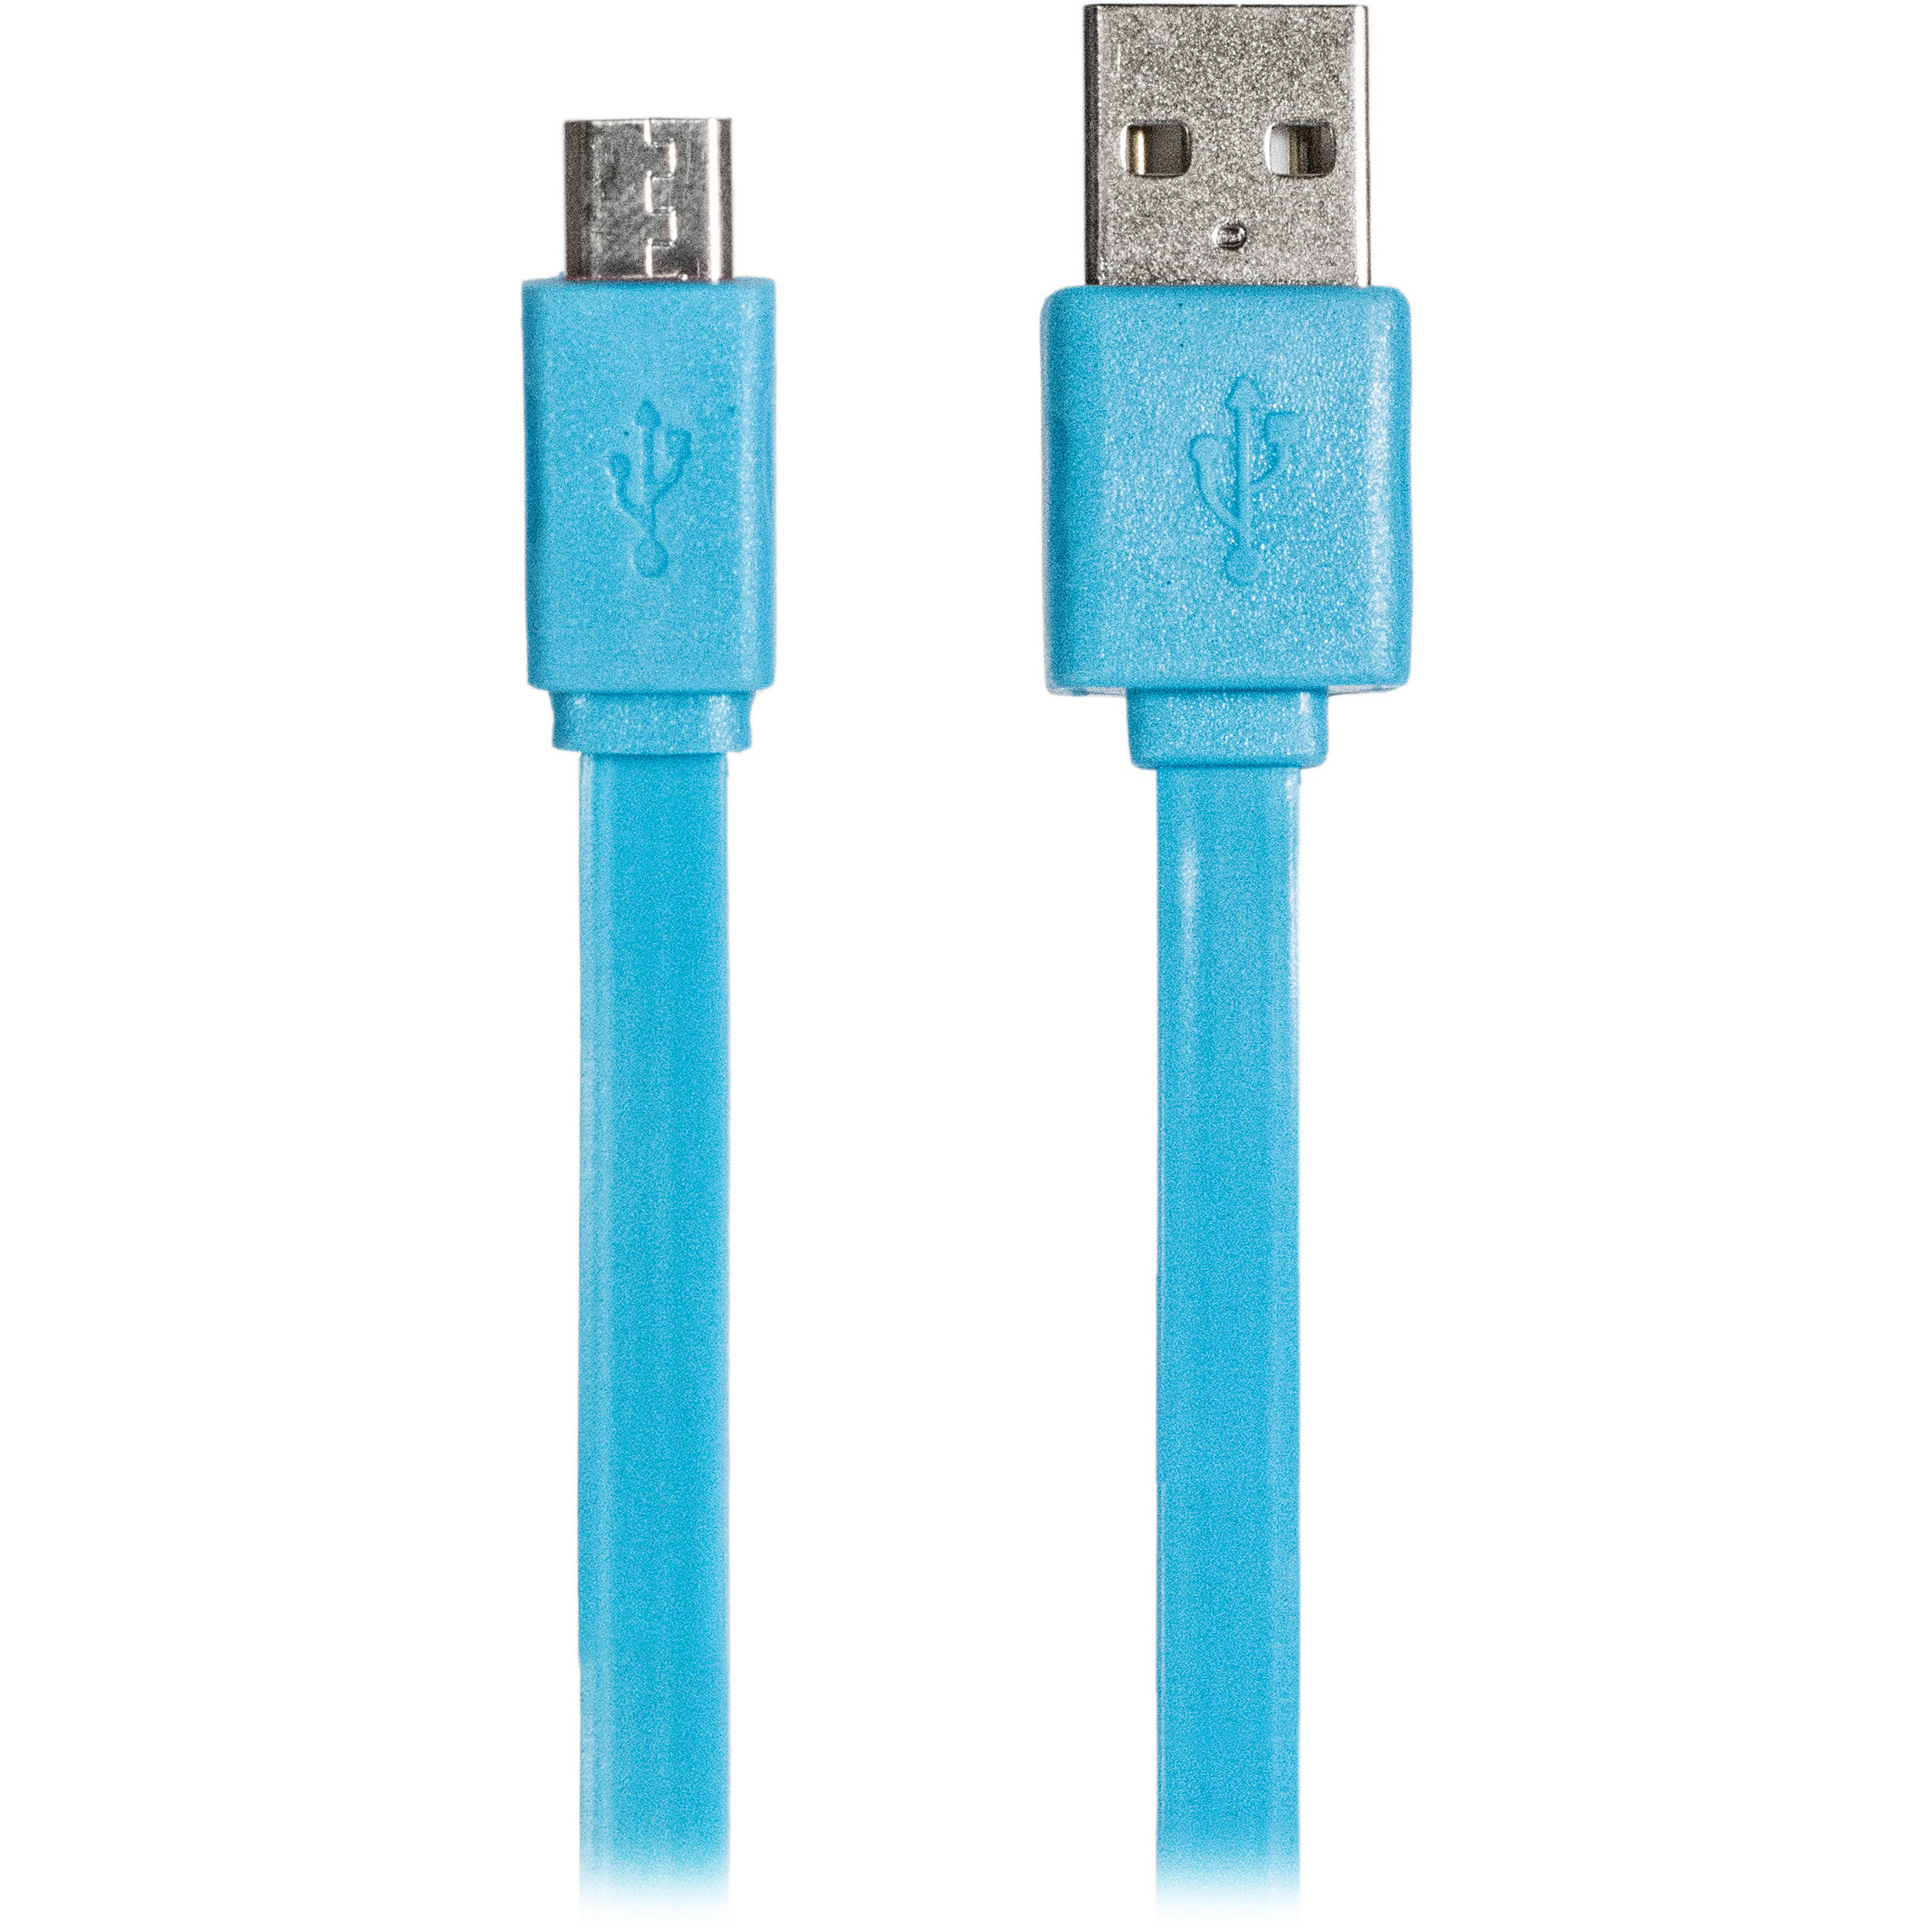 iEssentials Flat USB Type-A Male to Micro-USB Male Cable (6', Blue)